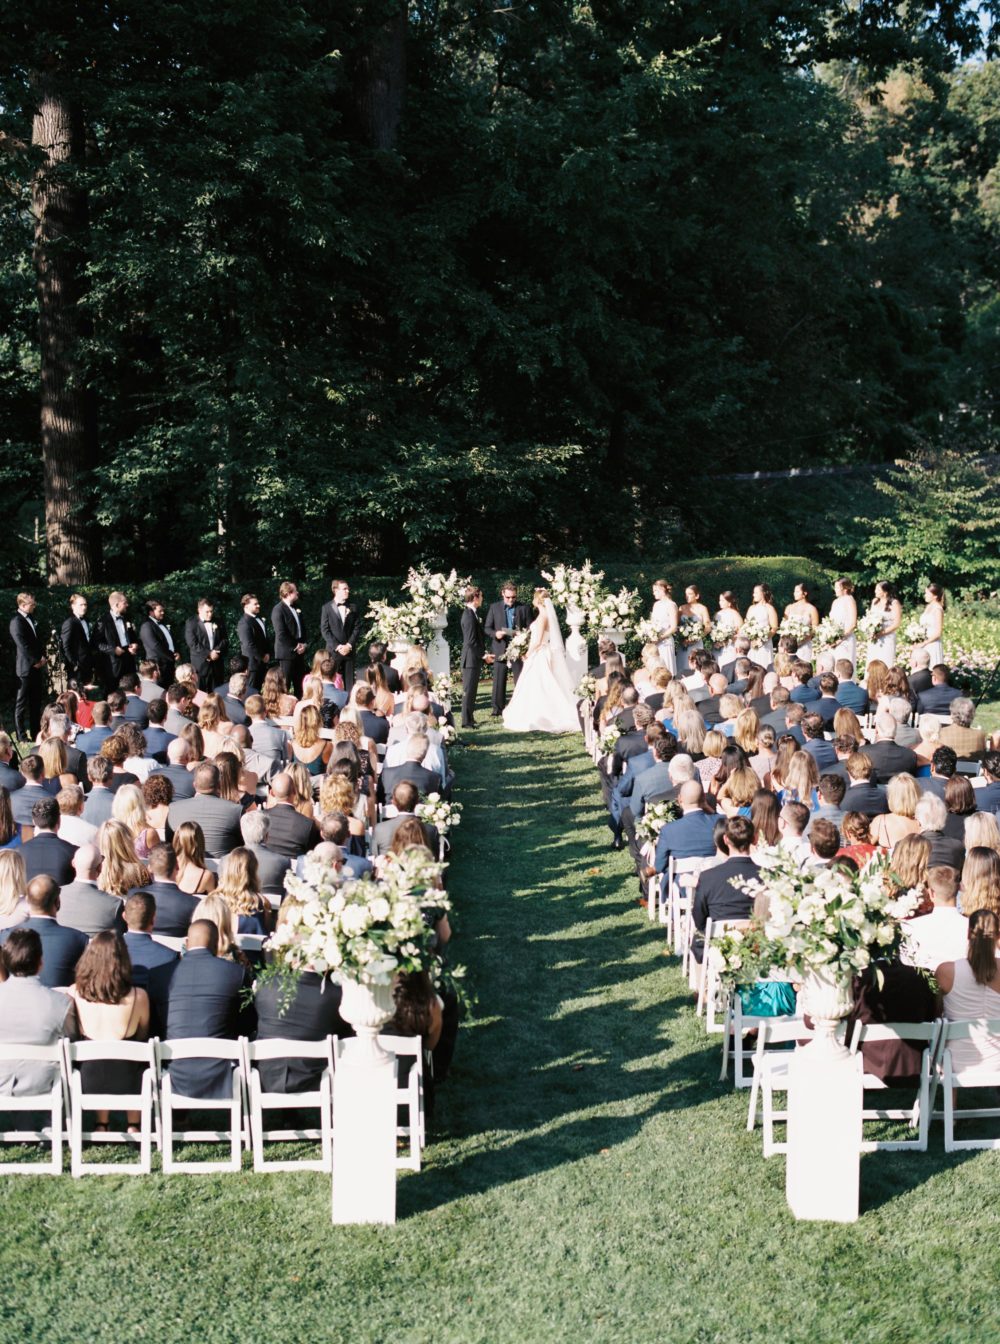 Baltimore Country Club wedding in Baltimore, Maryland planned by Elizabeth Bailey Events.